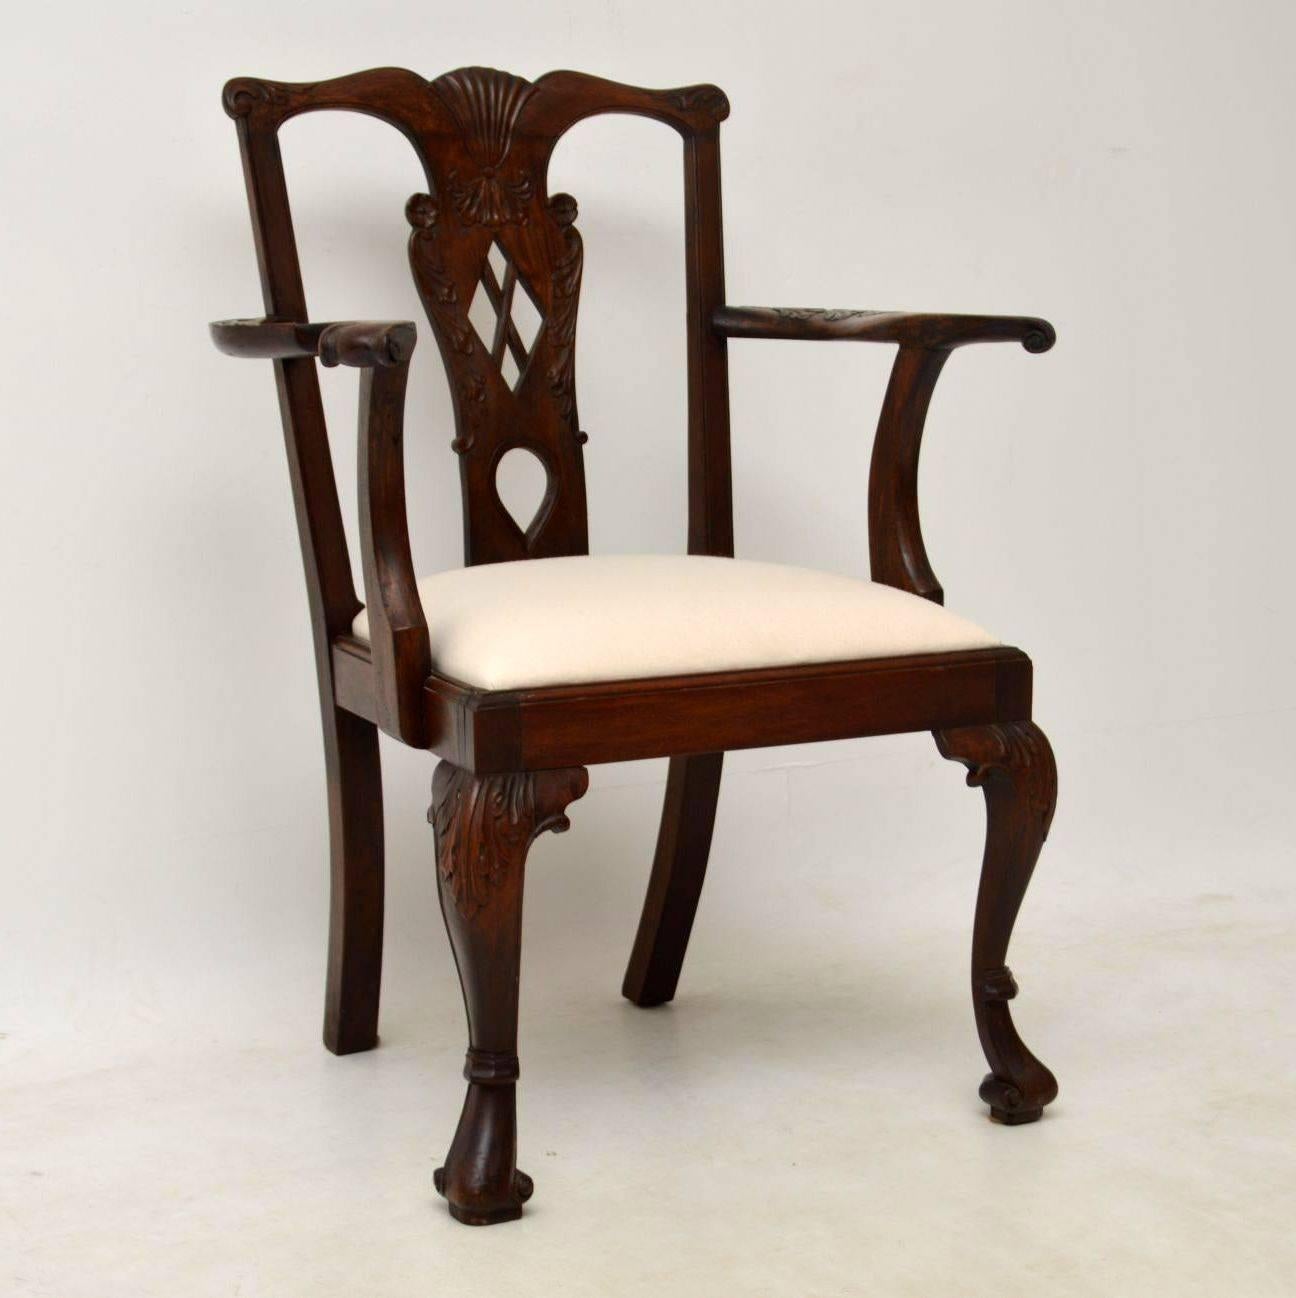 This pair of antique Chippendale style mahogany carver chairs have a matching set of four single chairs also on the site at the moment. This pair like the singles are in excellent condition and have very generous proportions. They are beautifully